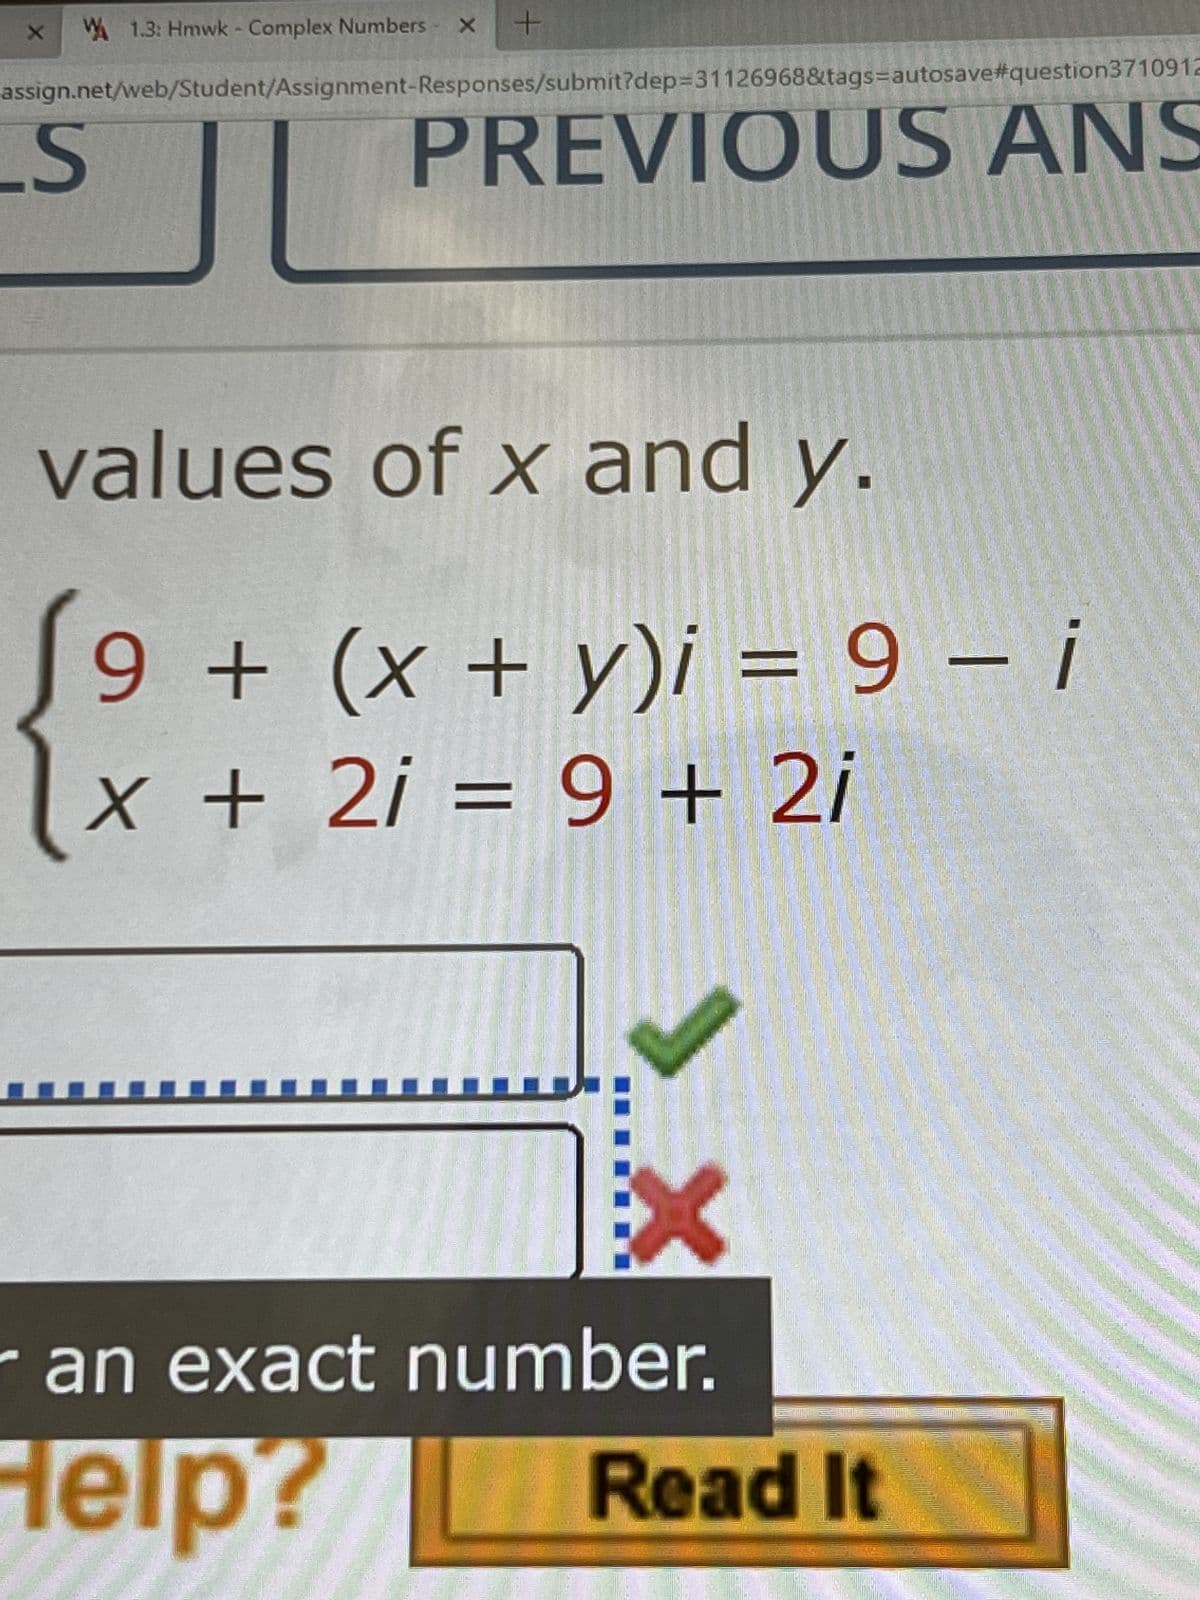 X
1.3: Hmwk - Complex Numbers
S
X
+
assign.net/web/Student/Assignment-Responses/submit?dep=31126968&tags=autosave#question3710912
PREVIOUS ANS
values of x and y.
9 + (x + y)i = 9 - i
X + 2i = 9 + 2i
an exact number.
Help?
Read It